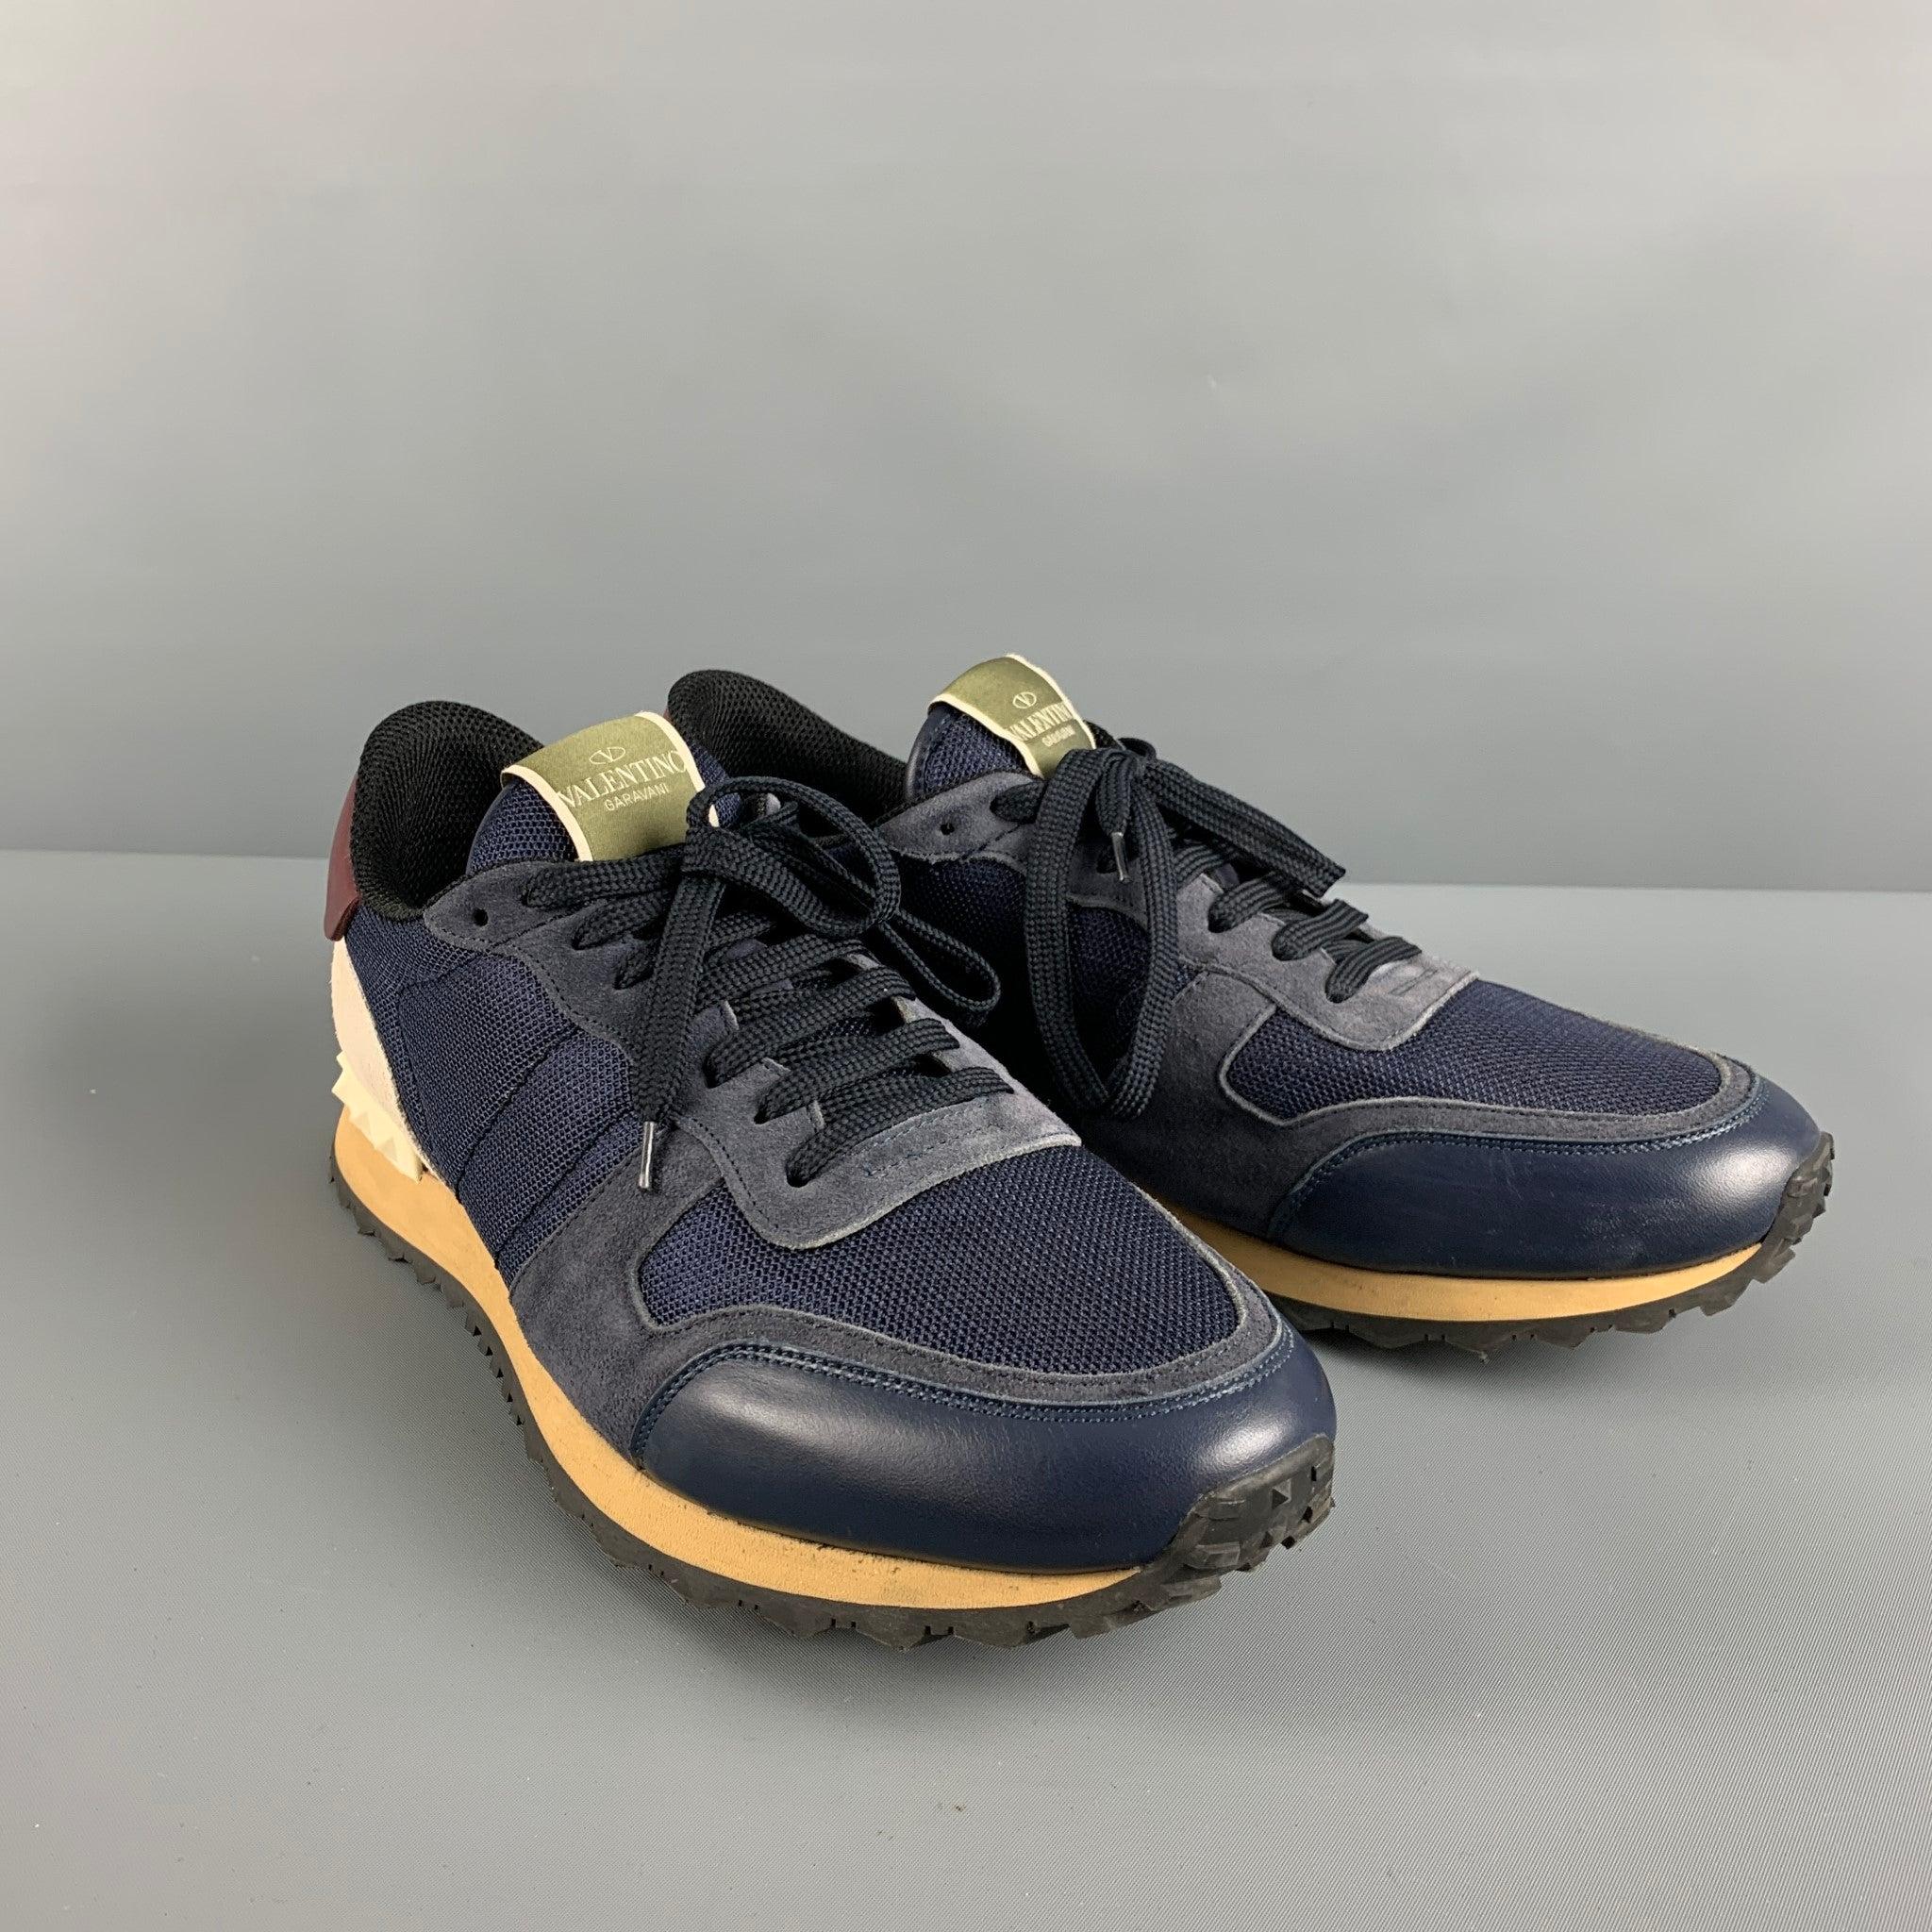 VALENTINO rock runner sneakers comes in a navy suede & leather featuring rubber stud details, color blocking design, and a lace up closure. Made in Italy. Very Good Pre-Owned Condition. 

Marked:   45Outsole: 13 inches  x 4 inches  
  
  
